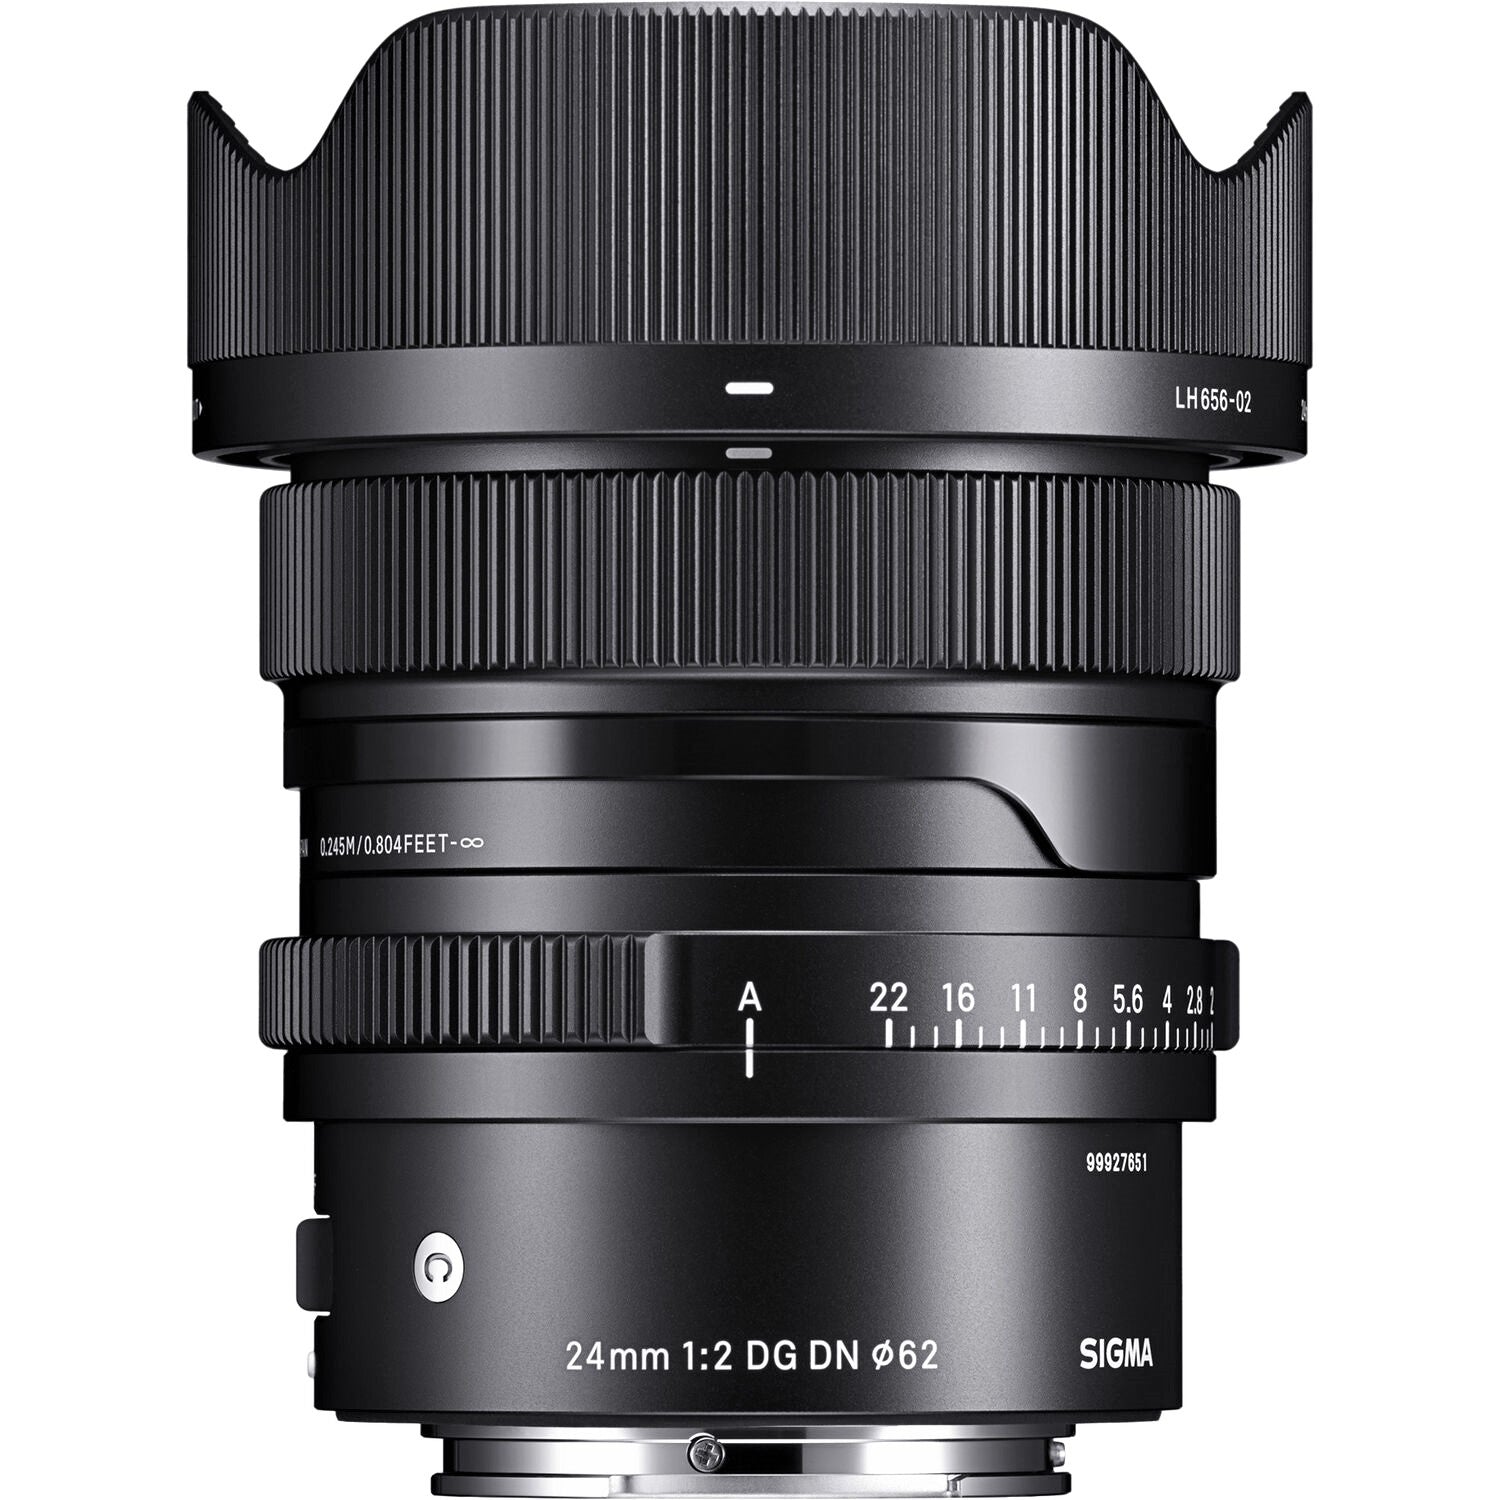 Sigma 24mm F2.0 DG DN Contemporary Lens (Sony E Mount) with Attached Lens Hood on the Top